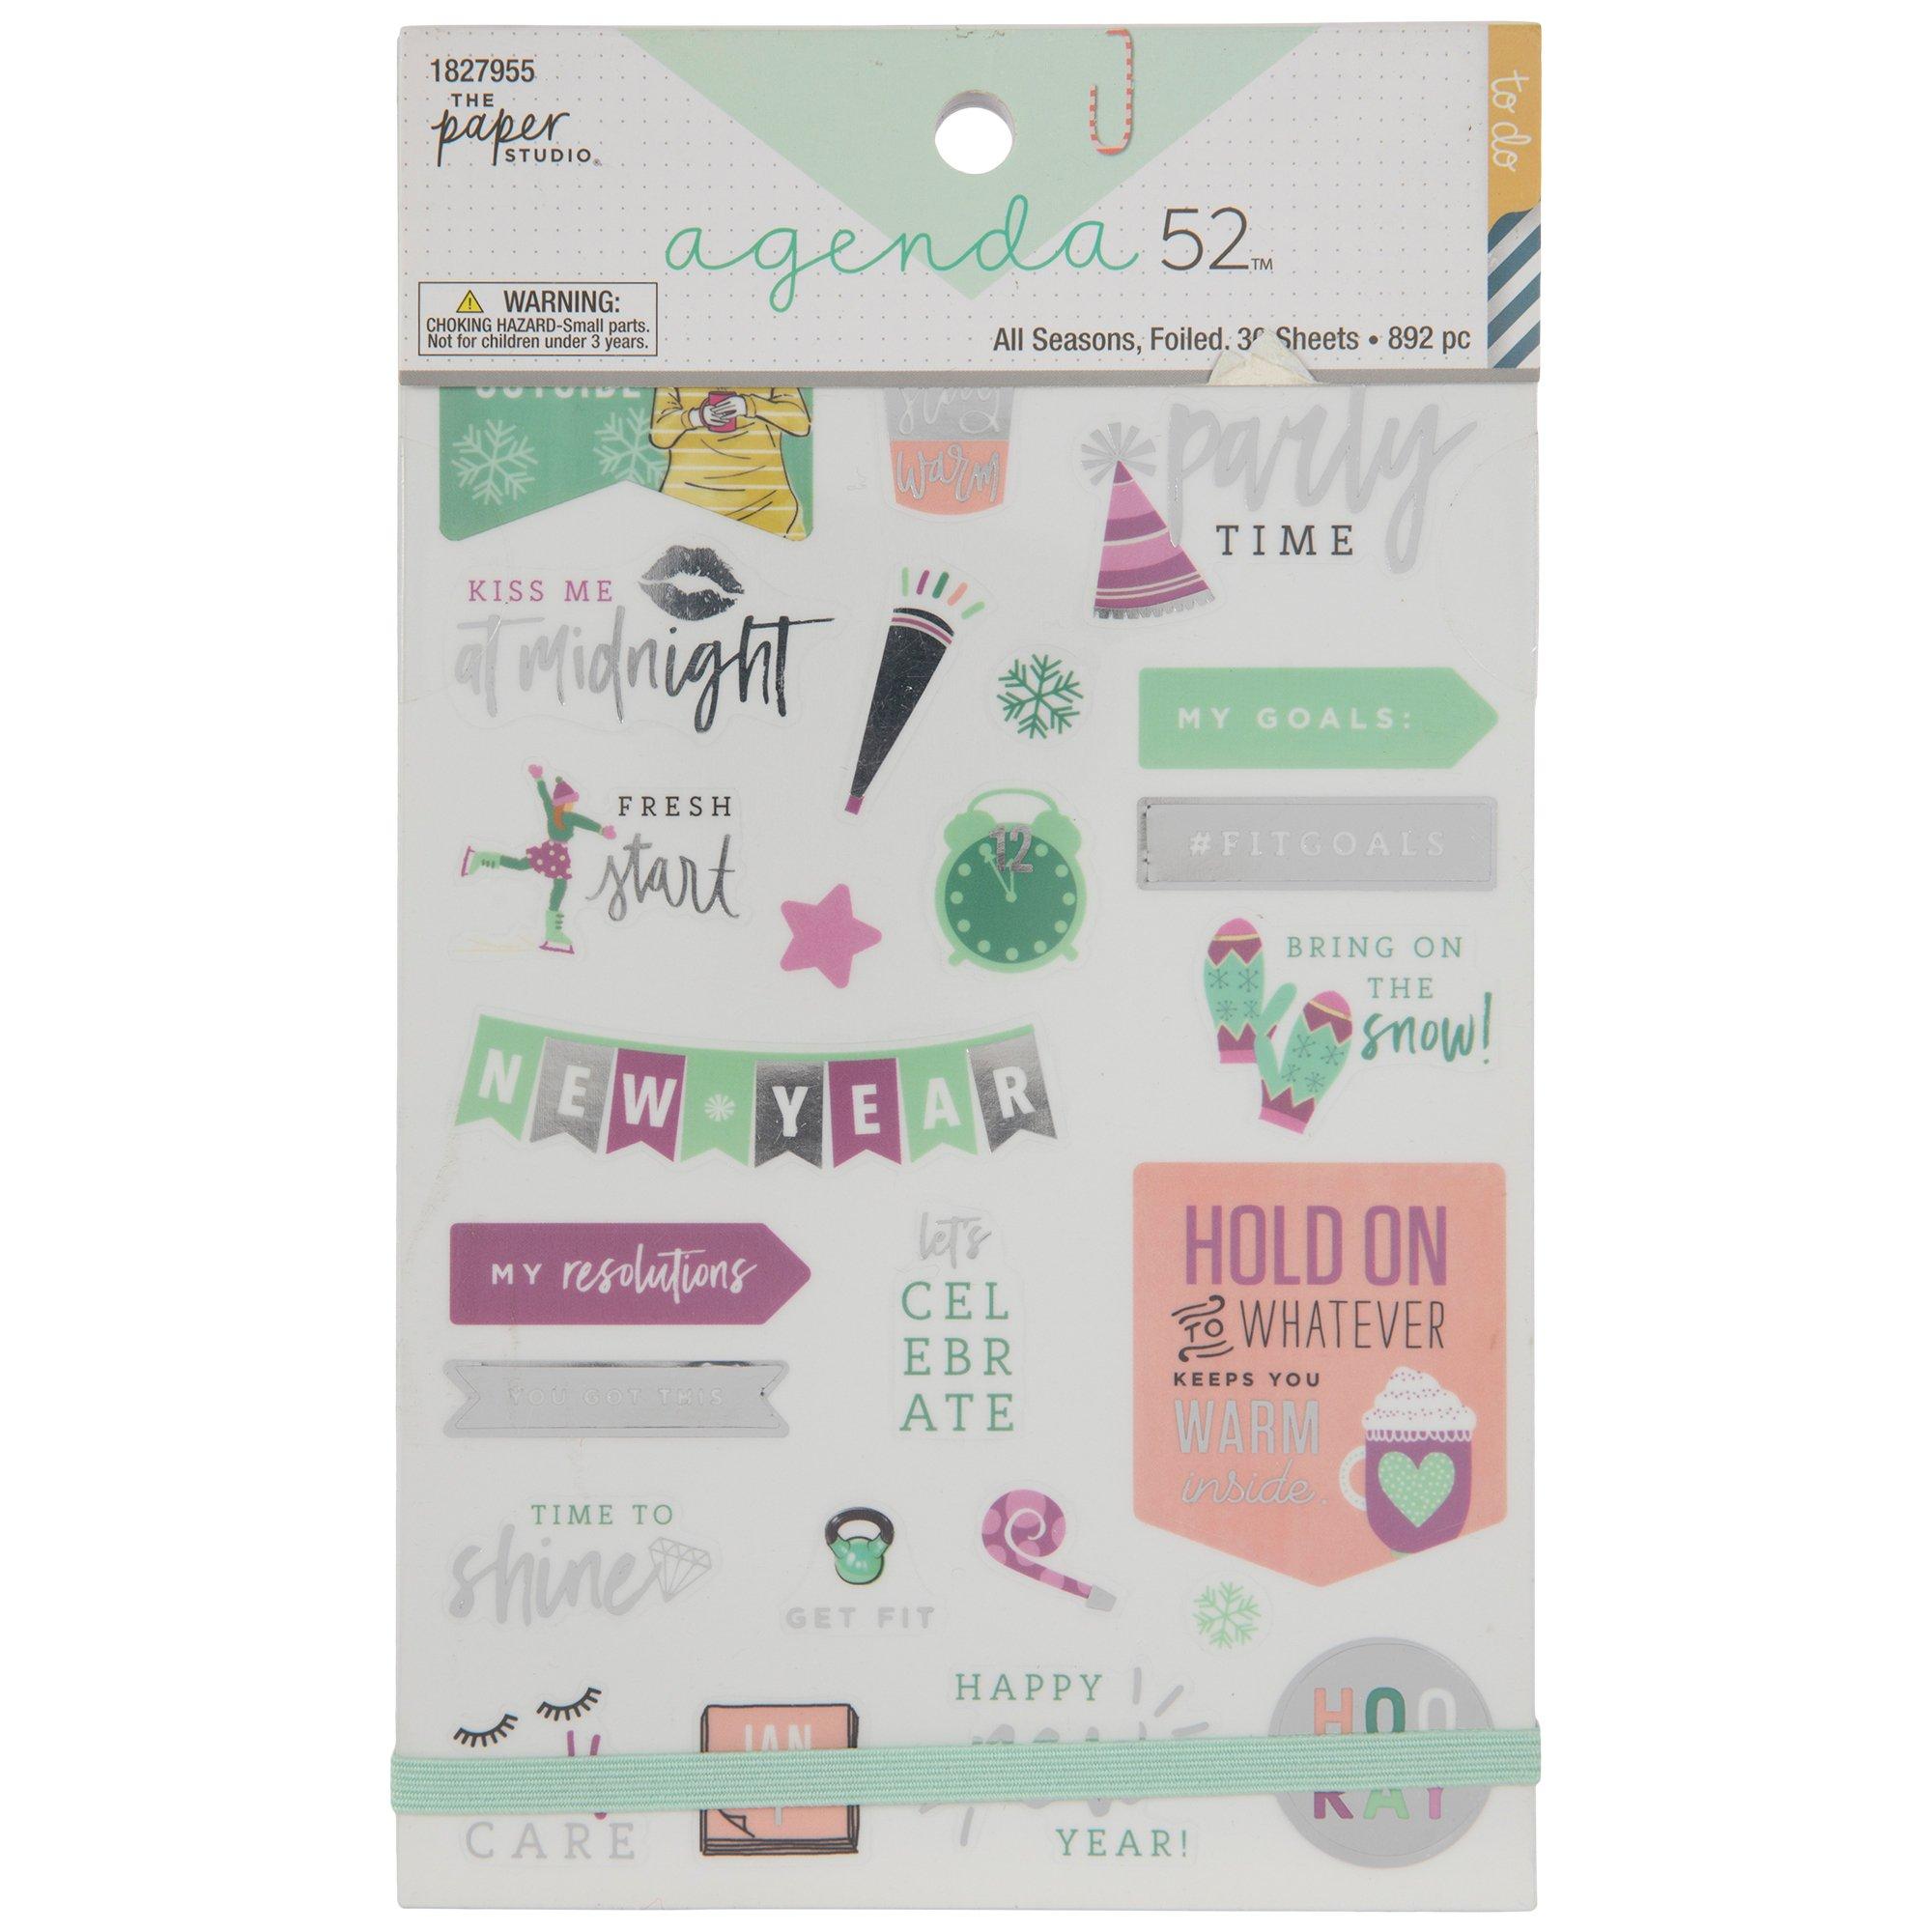 Numbers Foil Stickers, Hobby Lobby, 327098